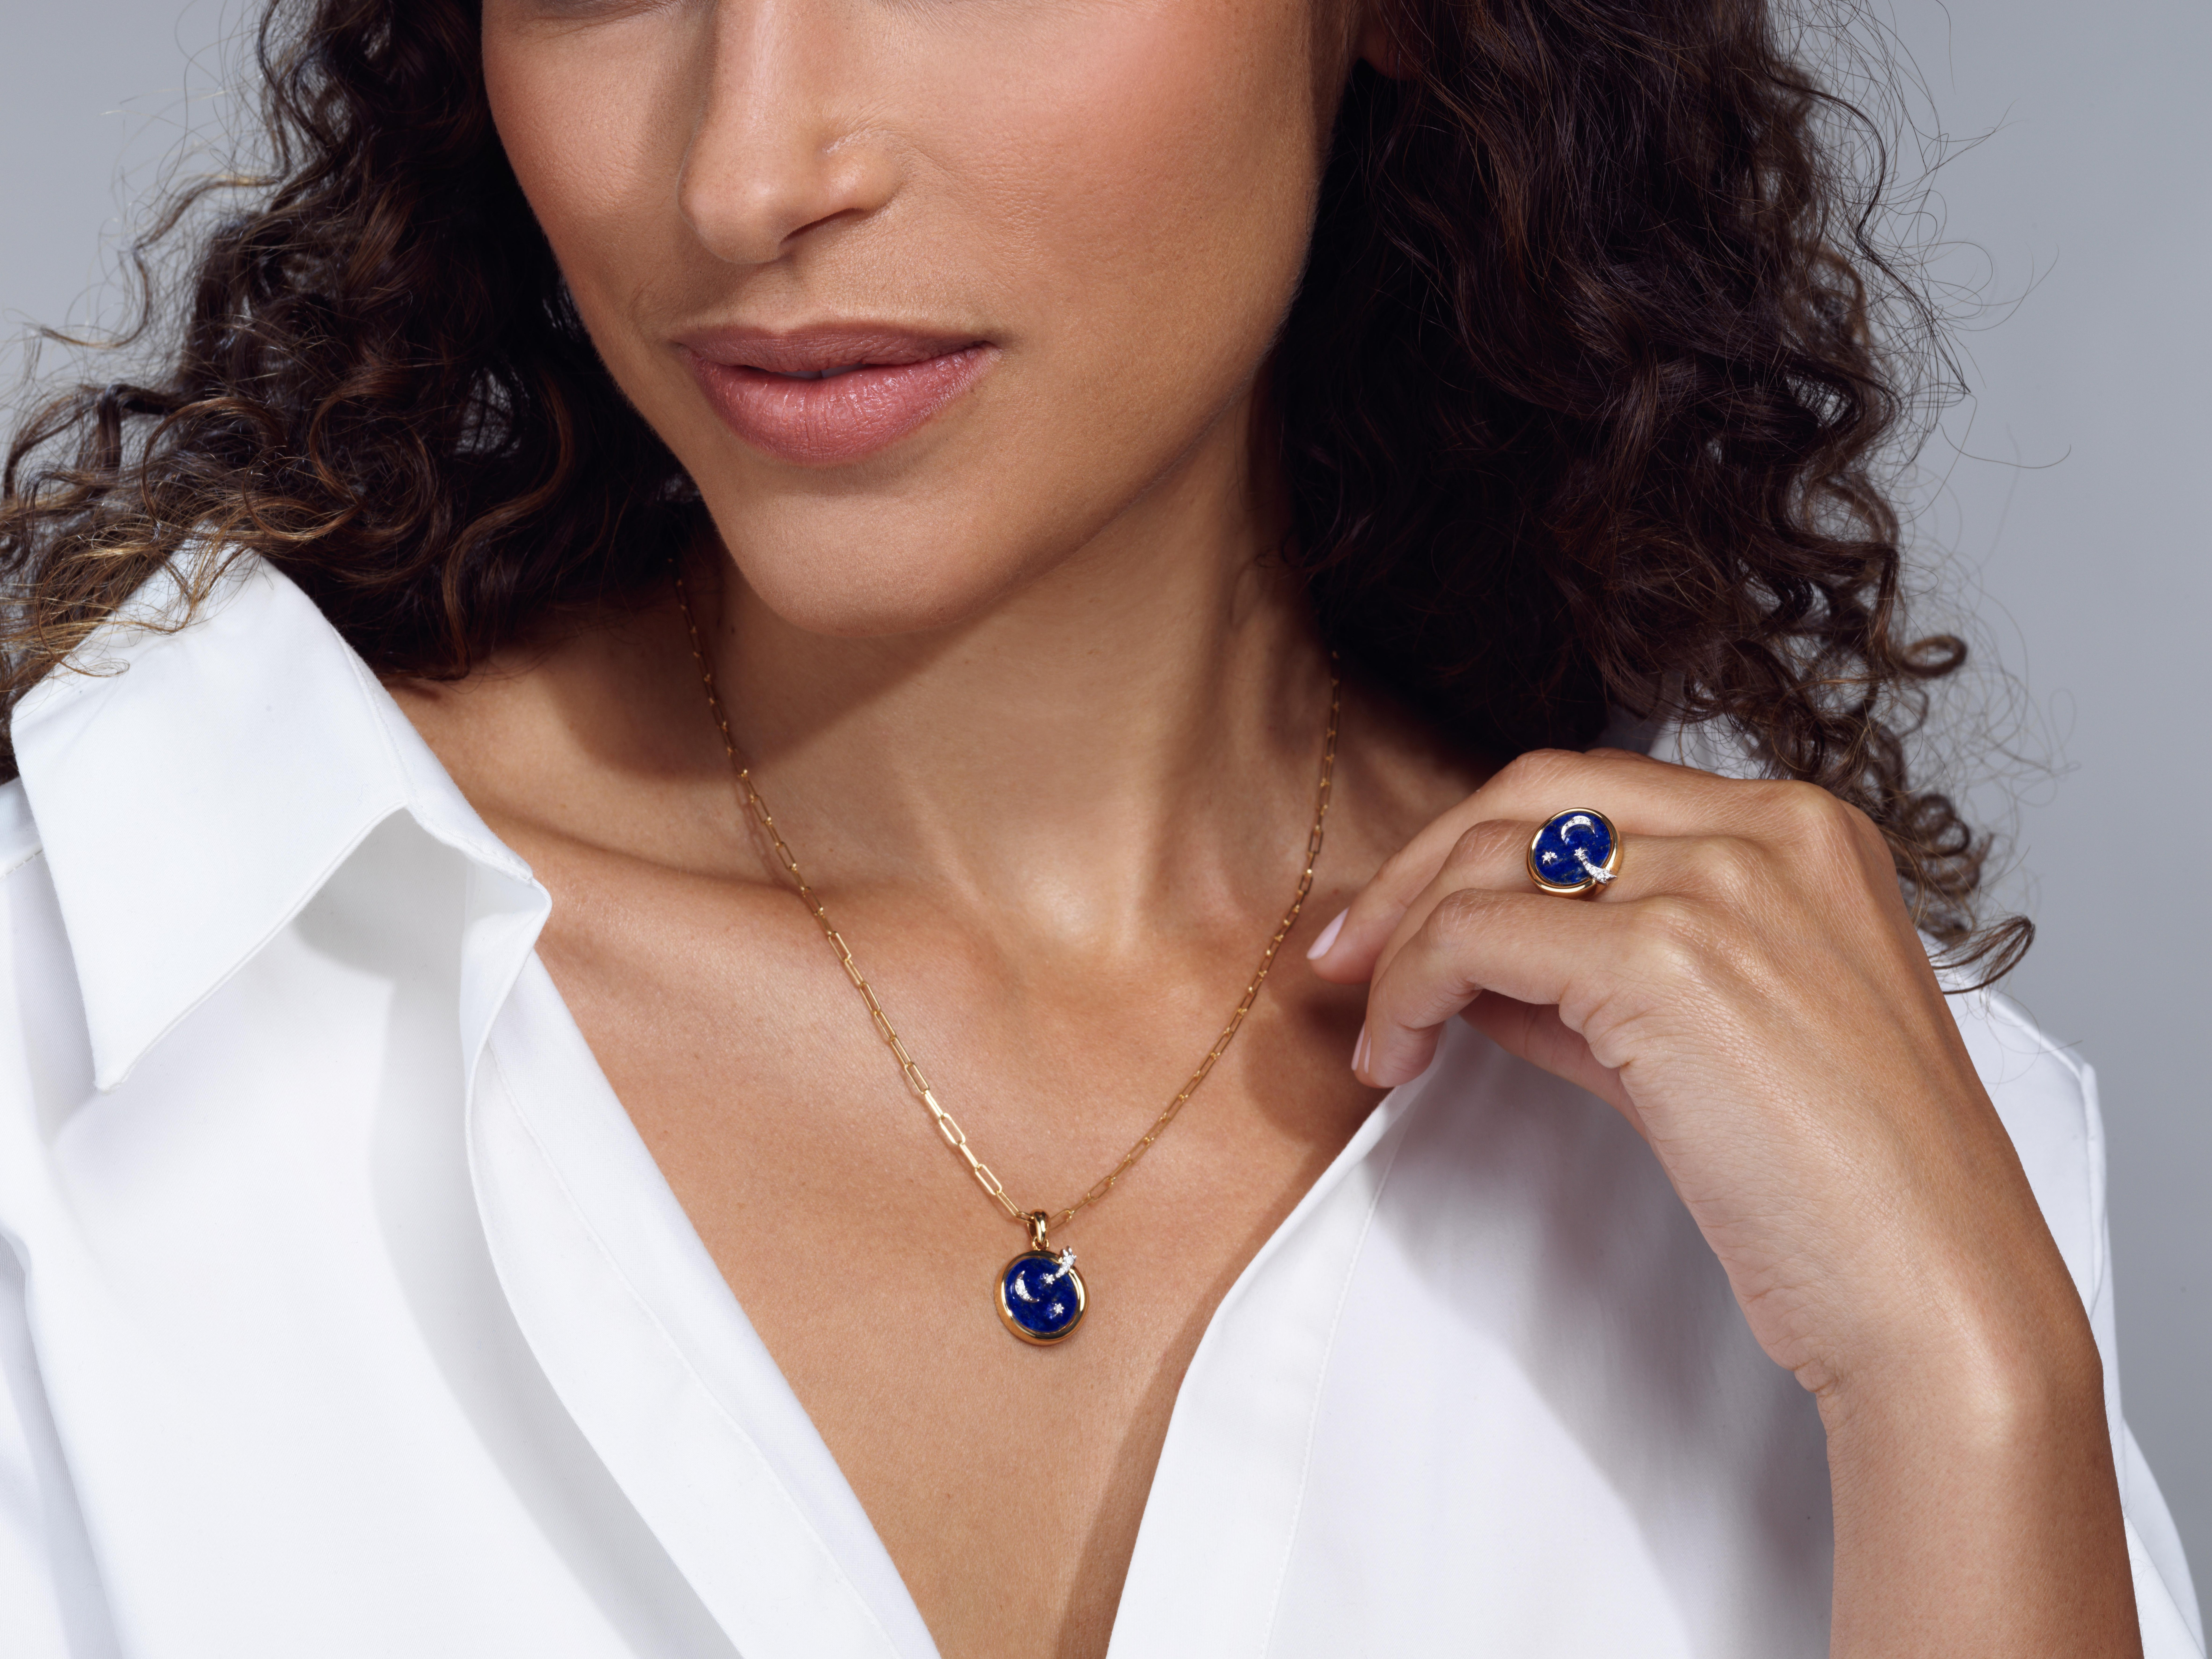 Women's AnaKatarina Elements 'Air' Pendant in 18 Karat Gold, Chilean Lapis, and Diamonds For Sale